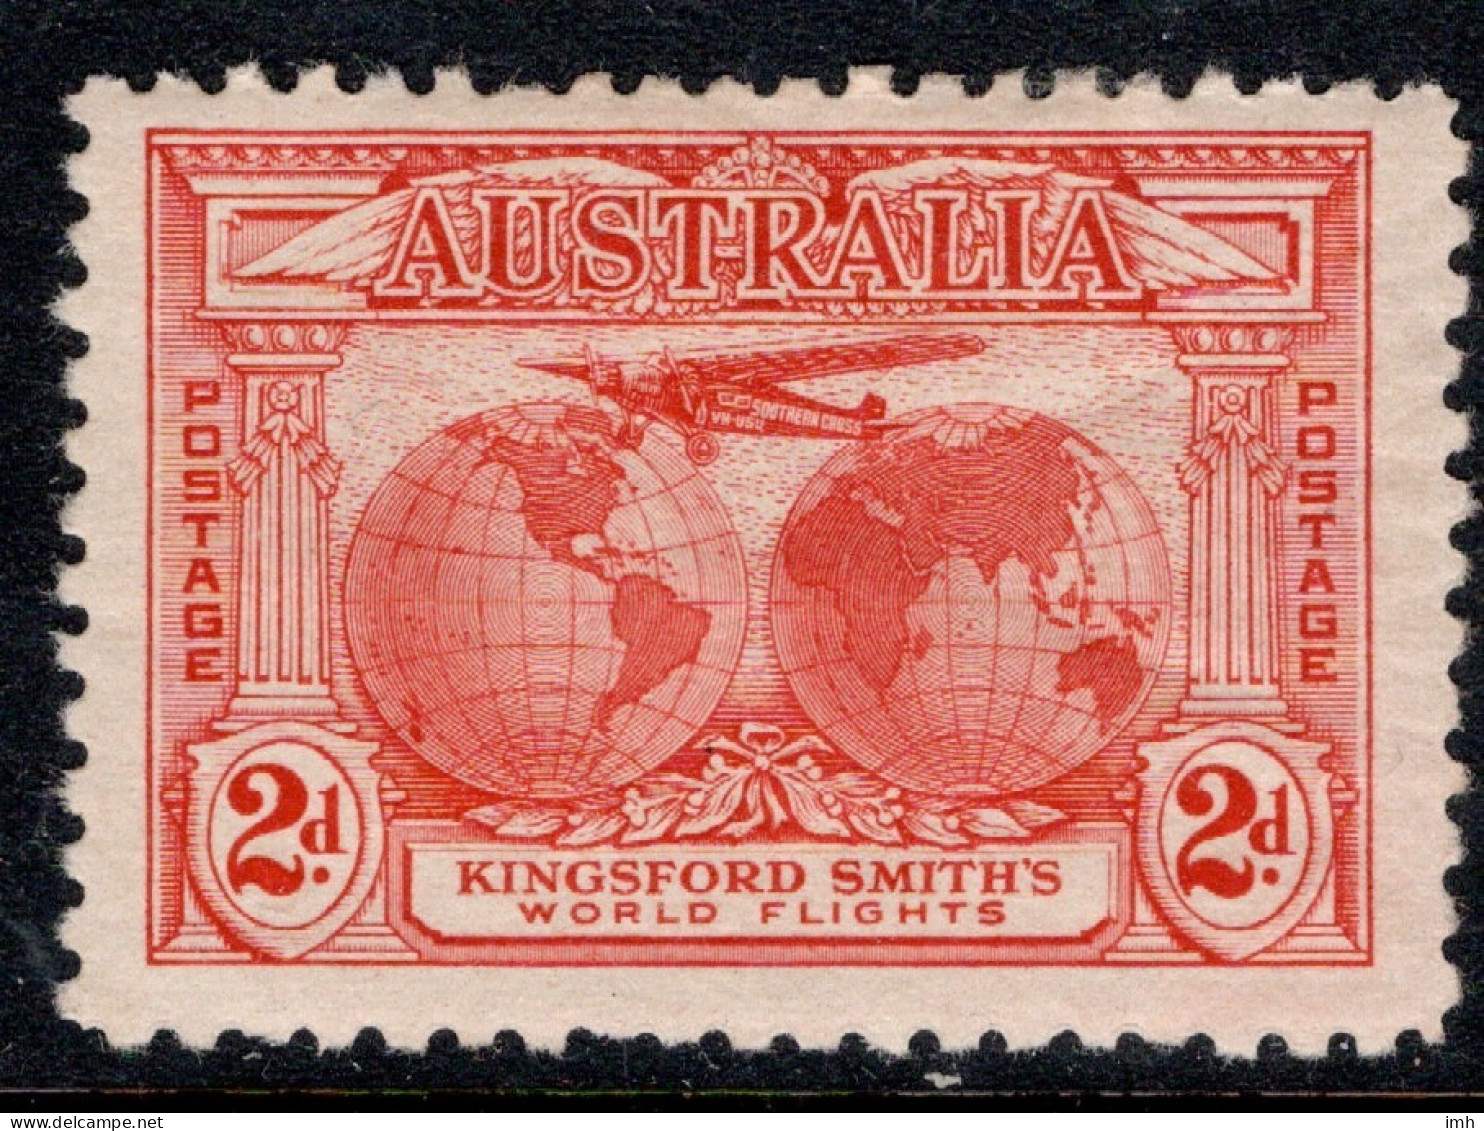 1931 Australia SG 121  2d Red  Kingsford Smith's Flights, Airplane, Globes Maps. Mint Lightly Hinged. Cat £2.25 - Mint Stamps